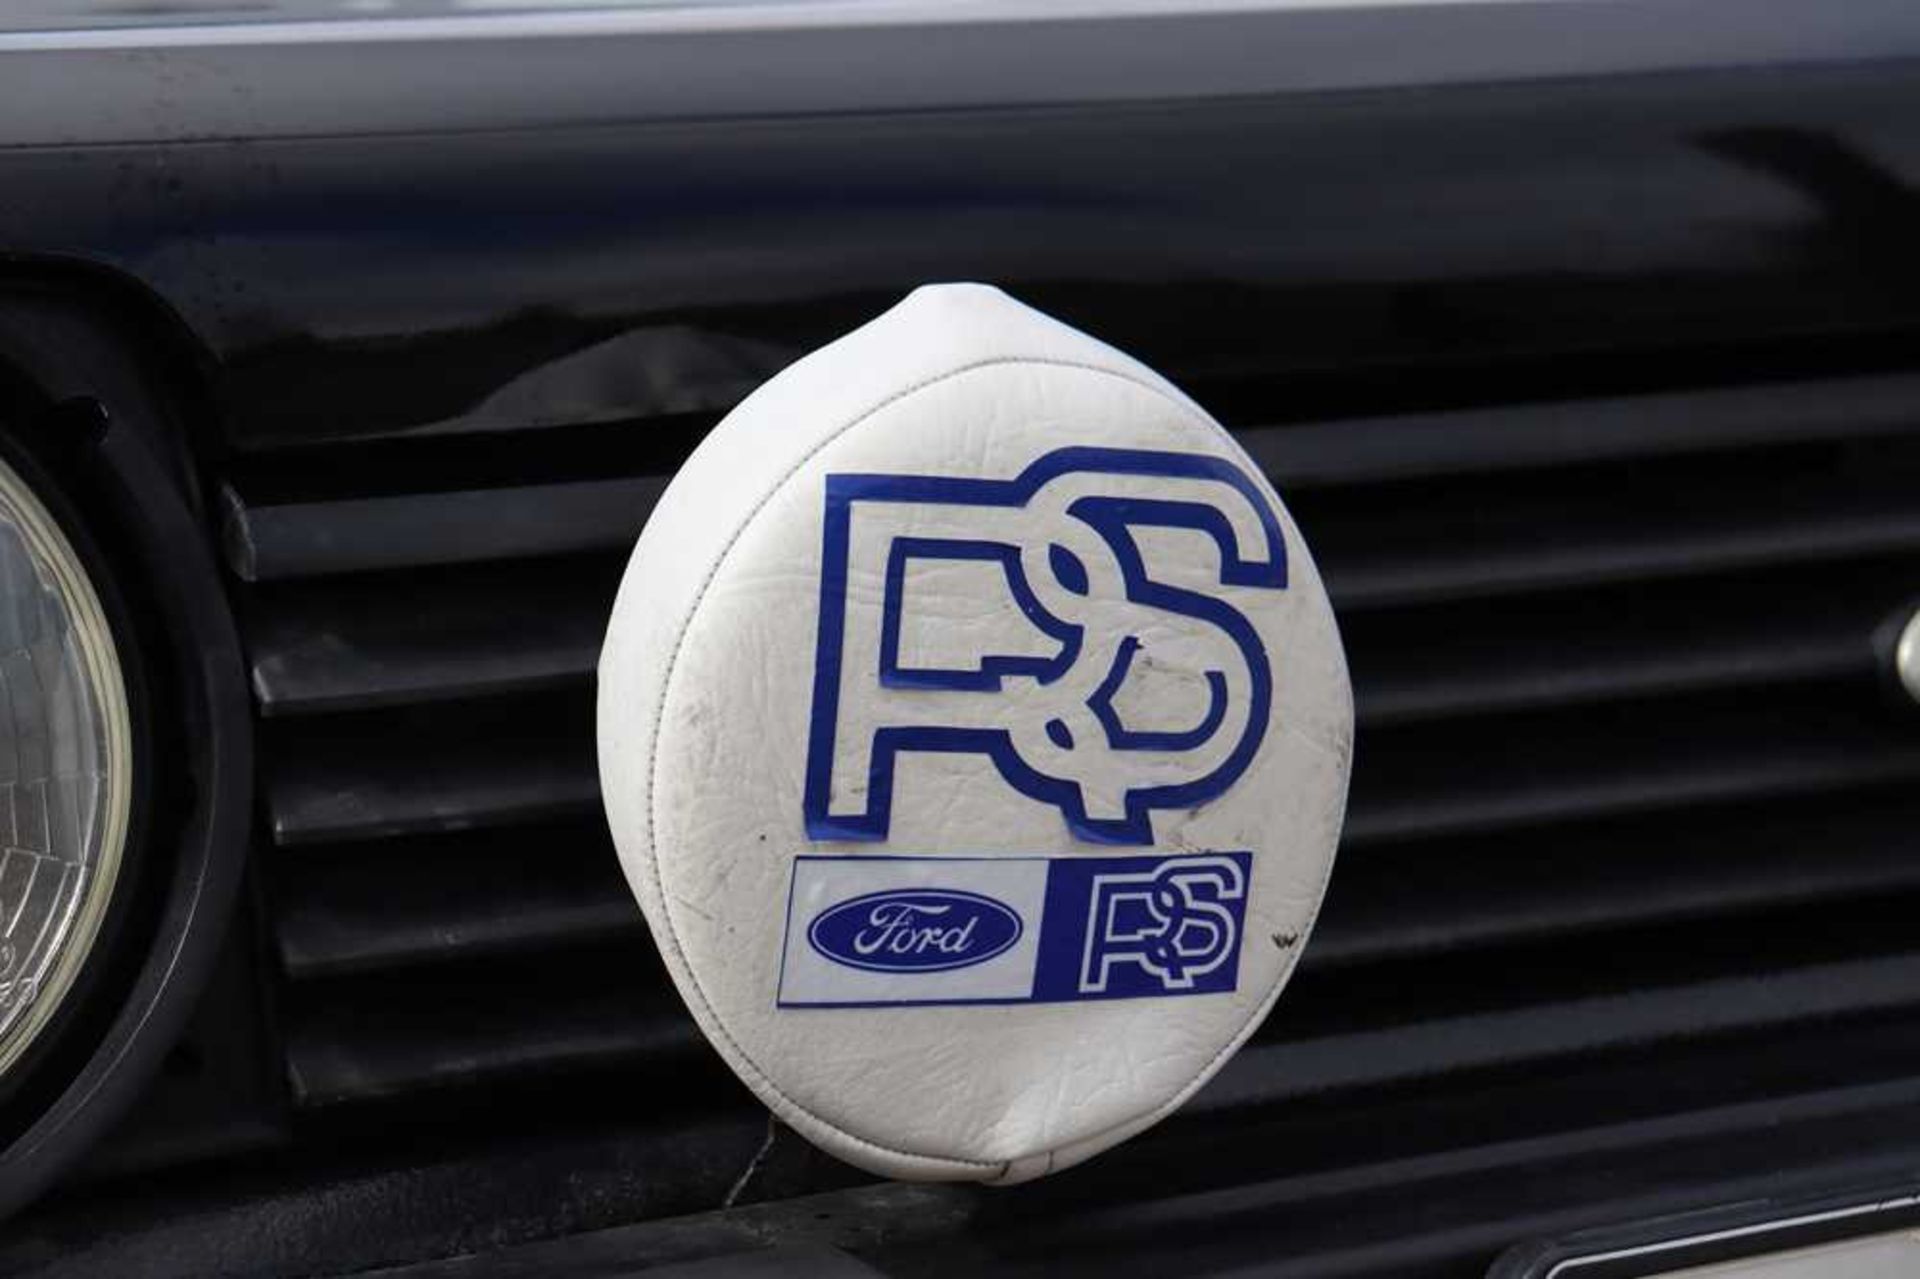 1983 Ford Fiesta XR2 - Image 33 of 56